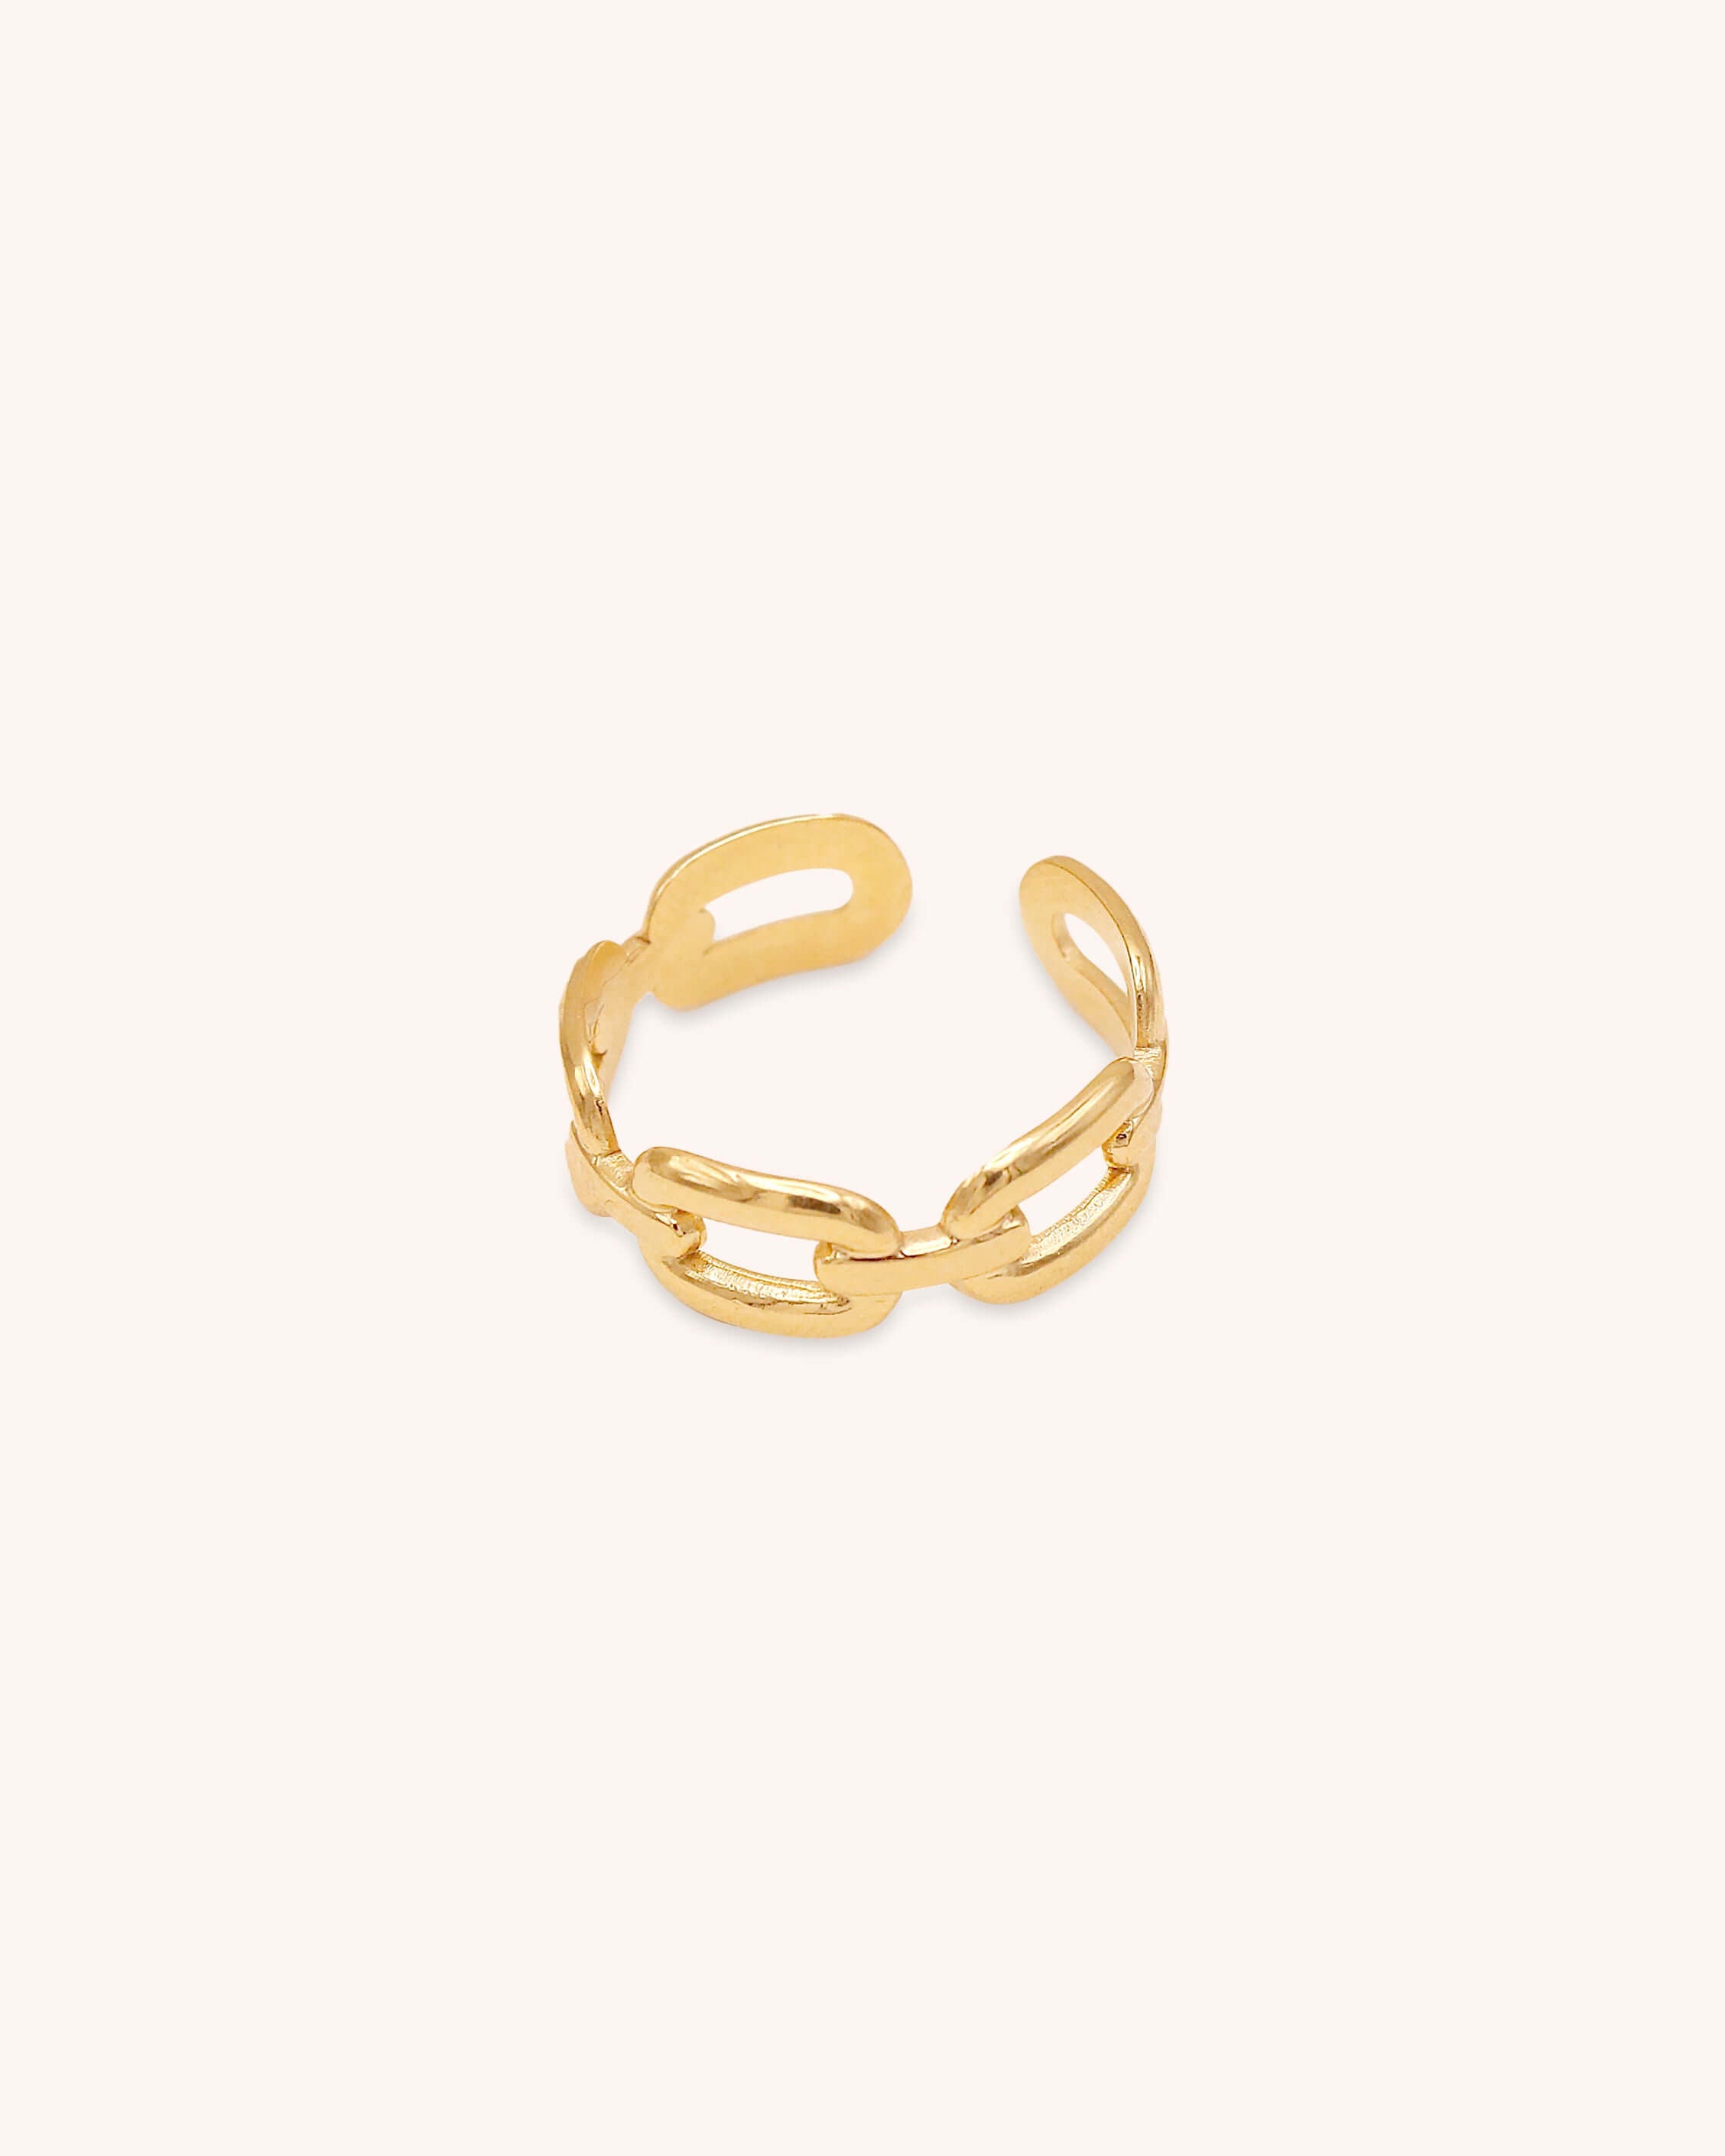 Chain Adjustable Ring | Stainless Steel